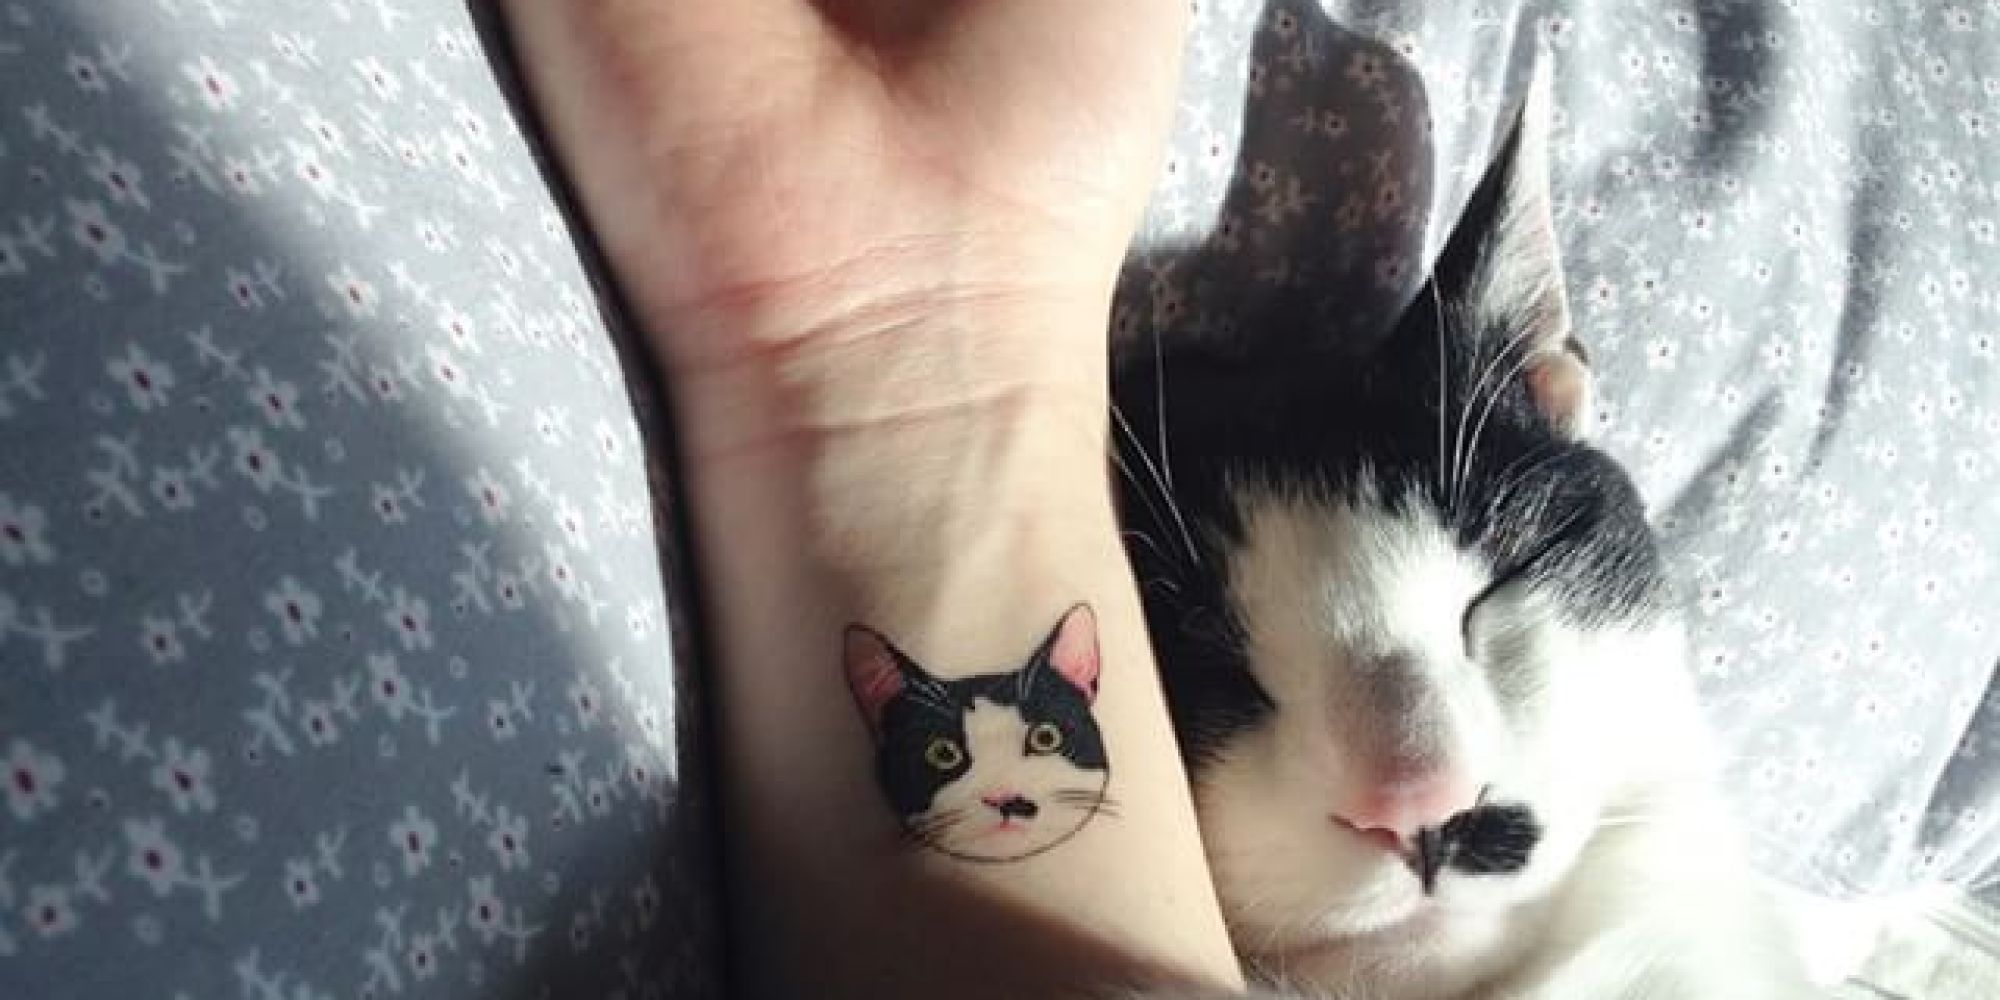 The model with a cat tattoo.